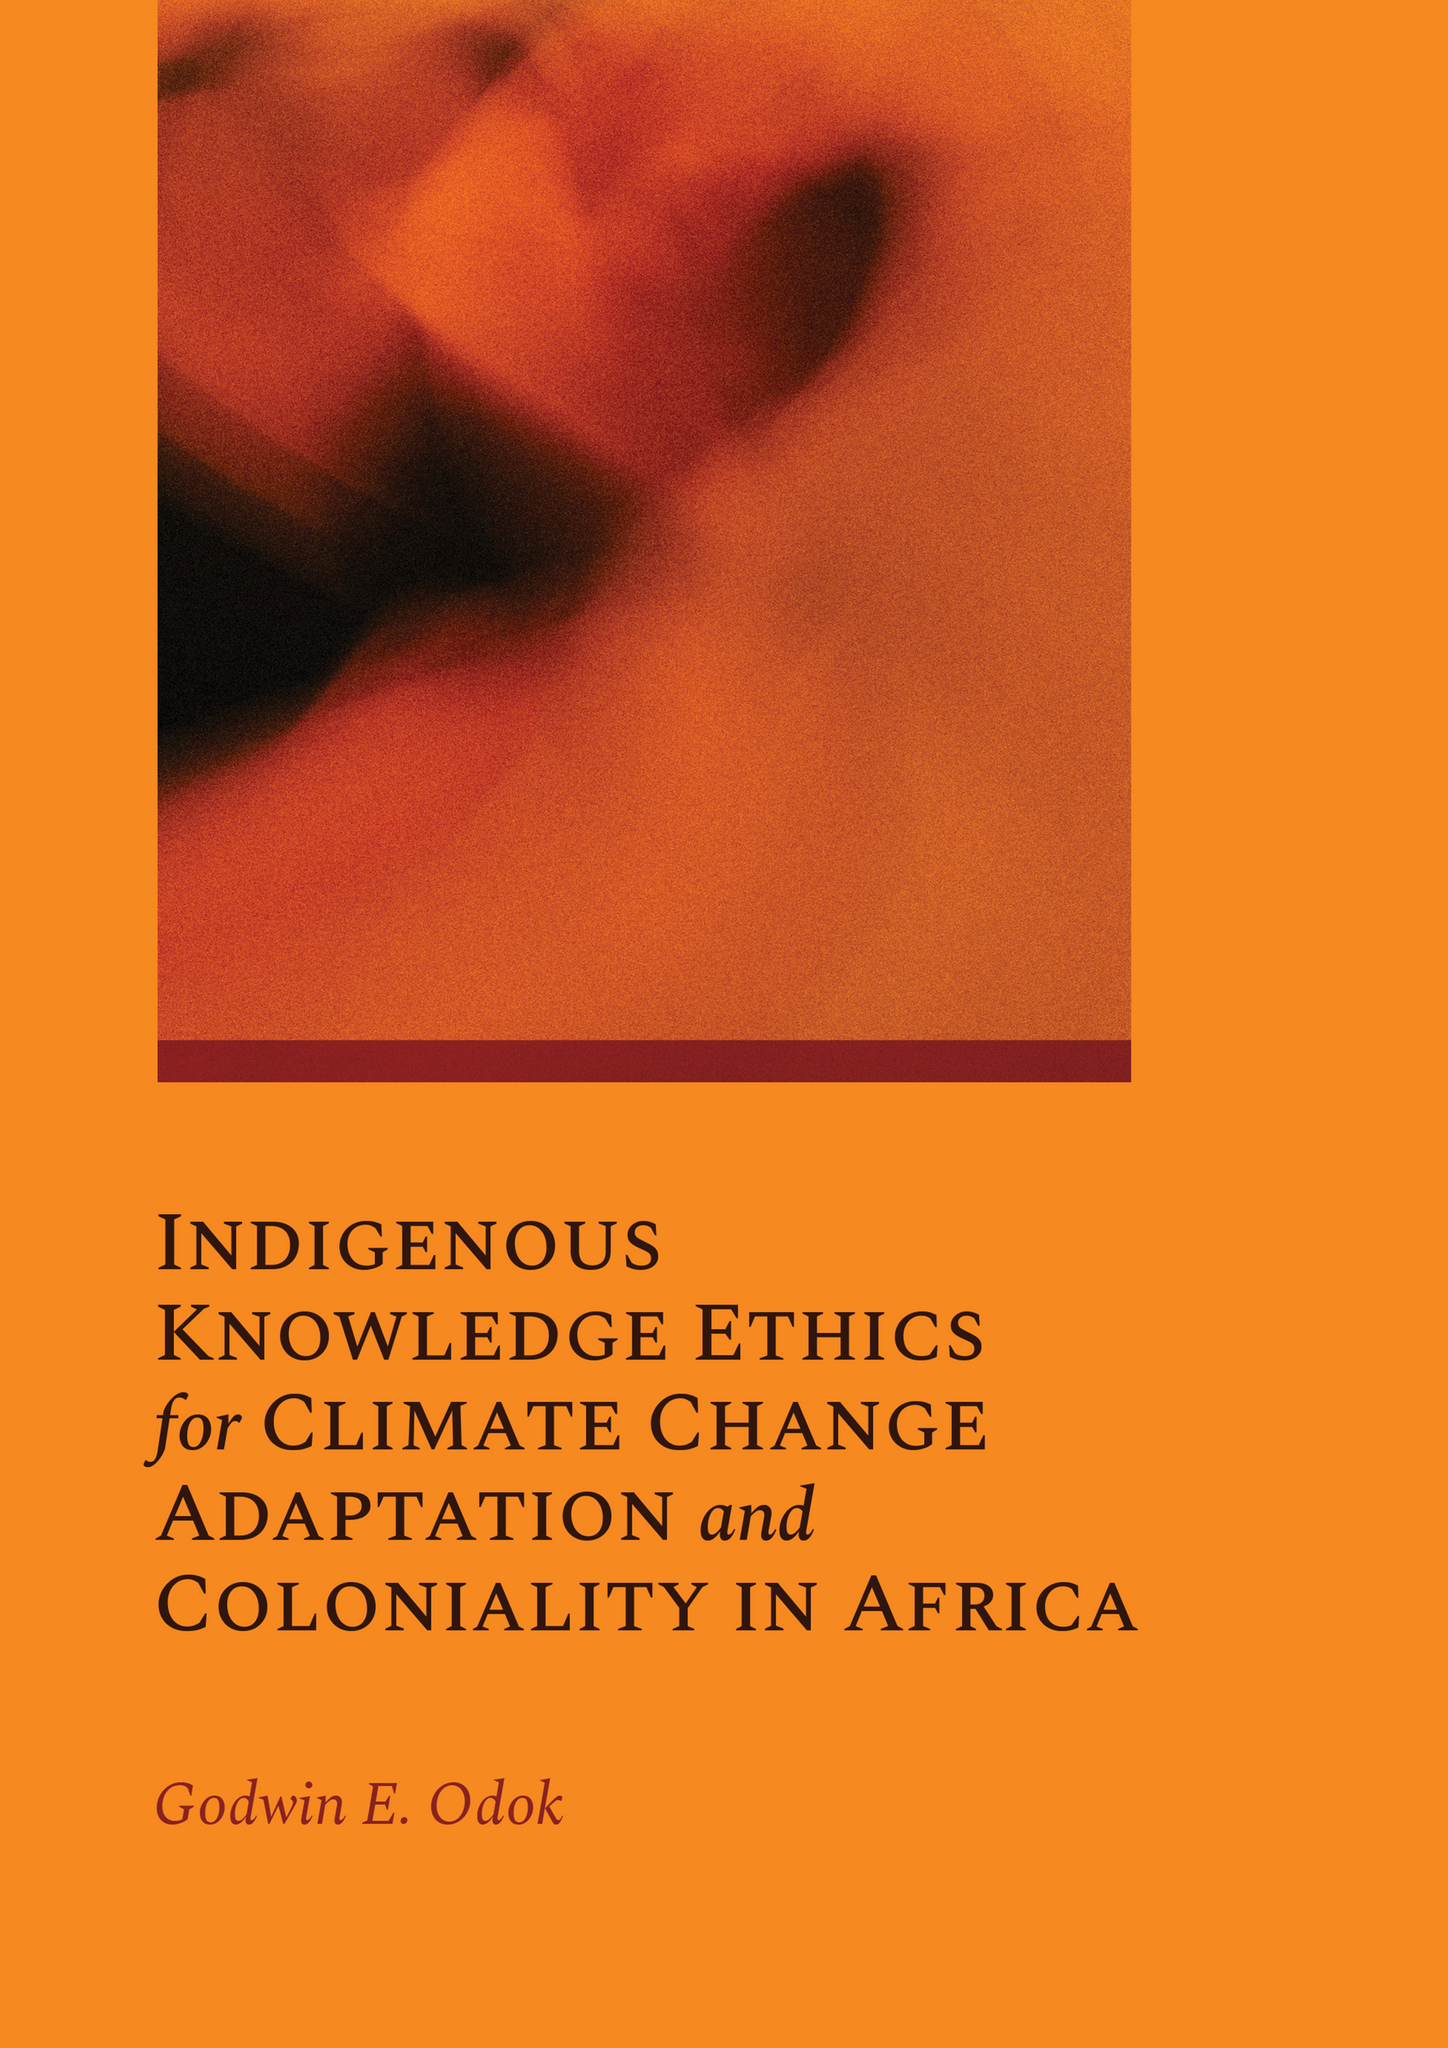 Indigenous Knowledge Ethics for Climate Change Adaptation and Coloniality in Africa